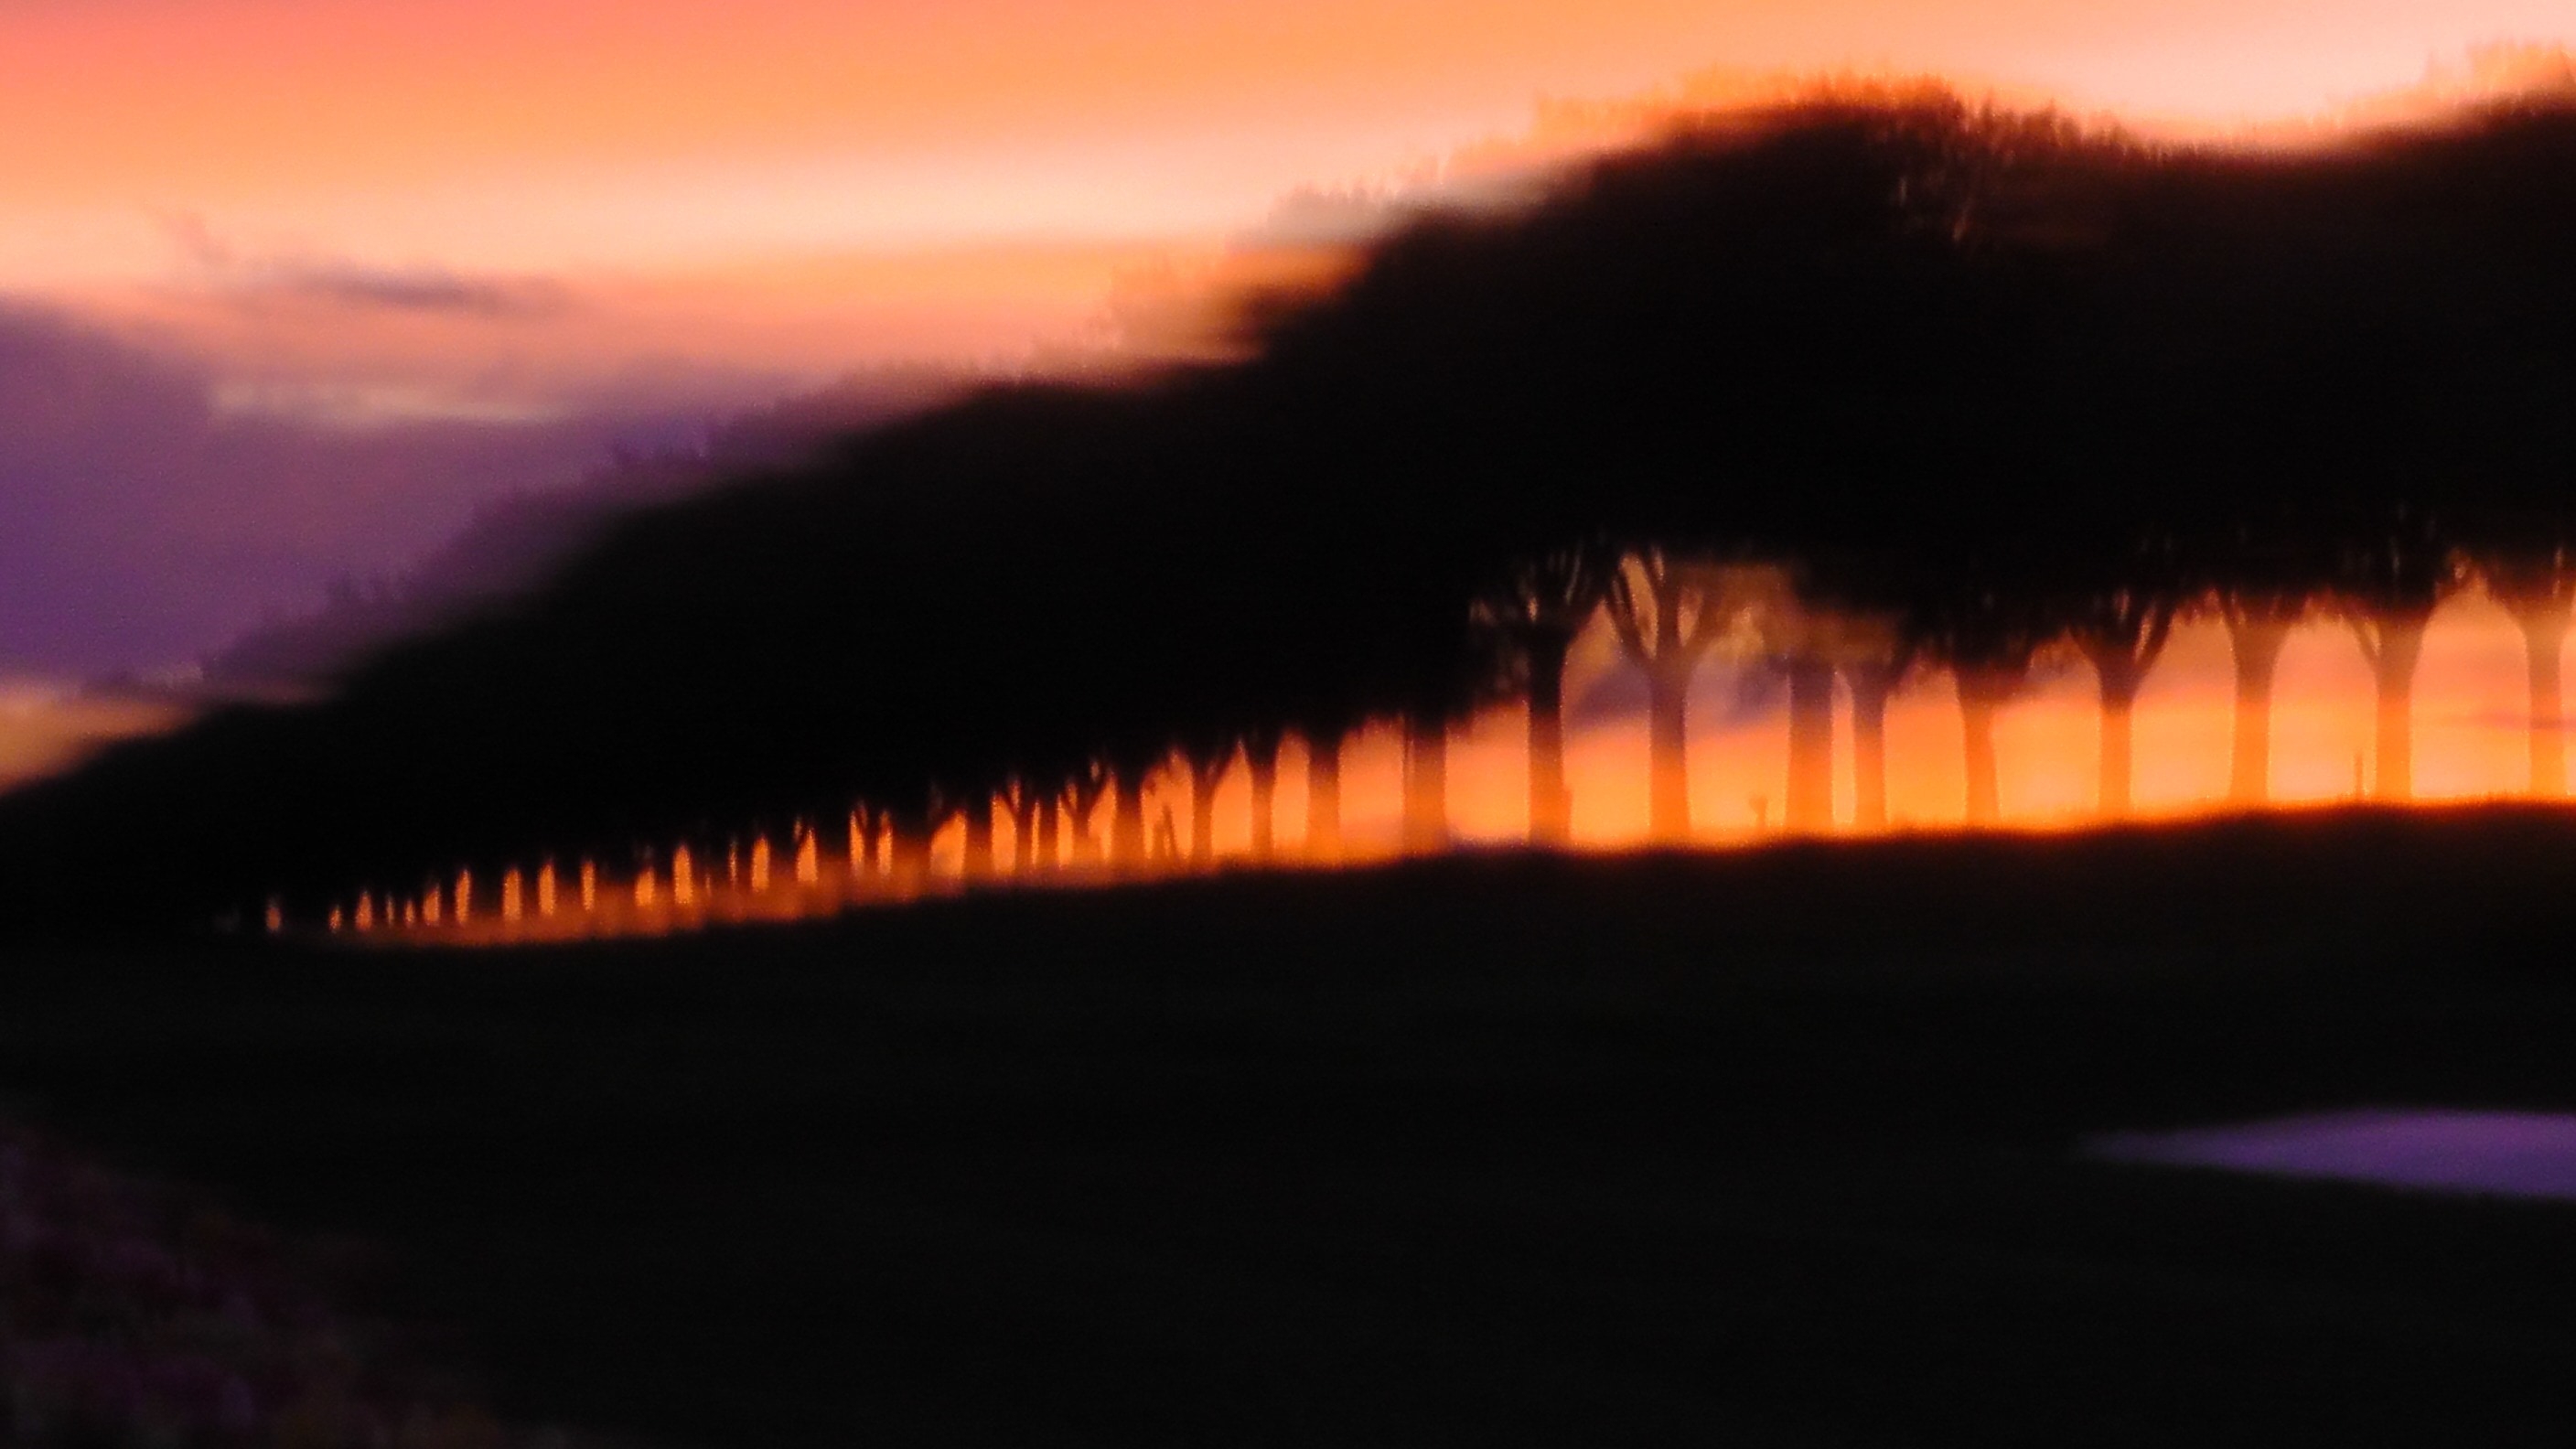 Silouette, Shadow, Light, Trees, Blurry, sunset, orange color